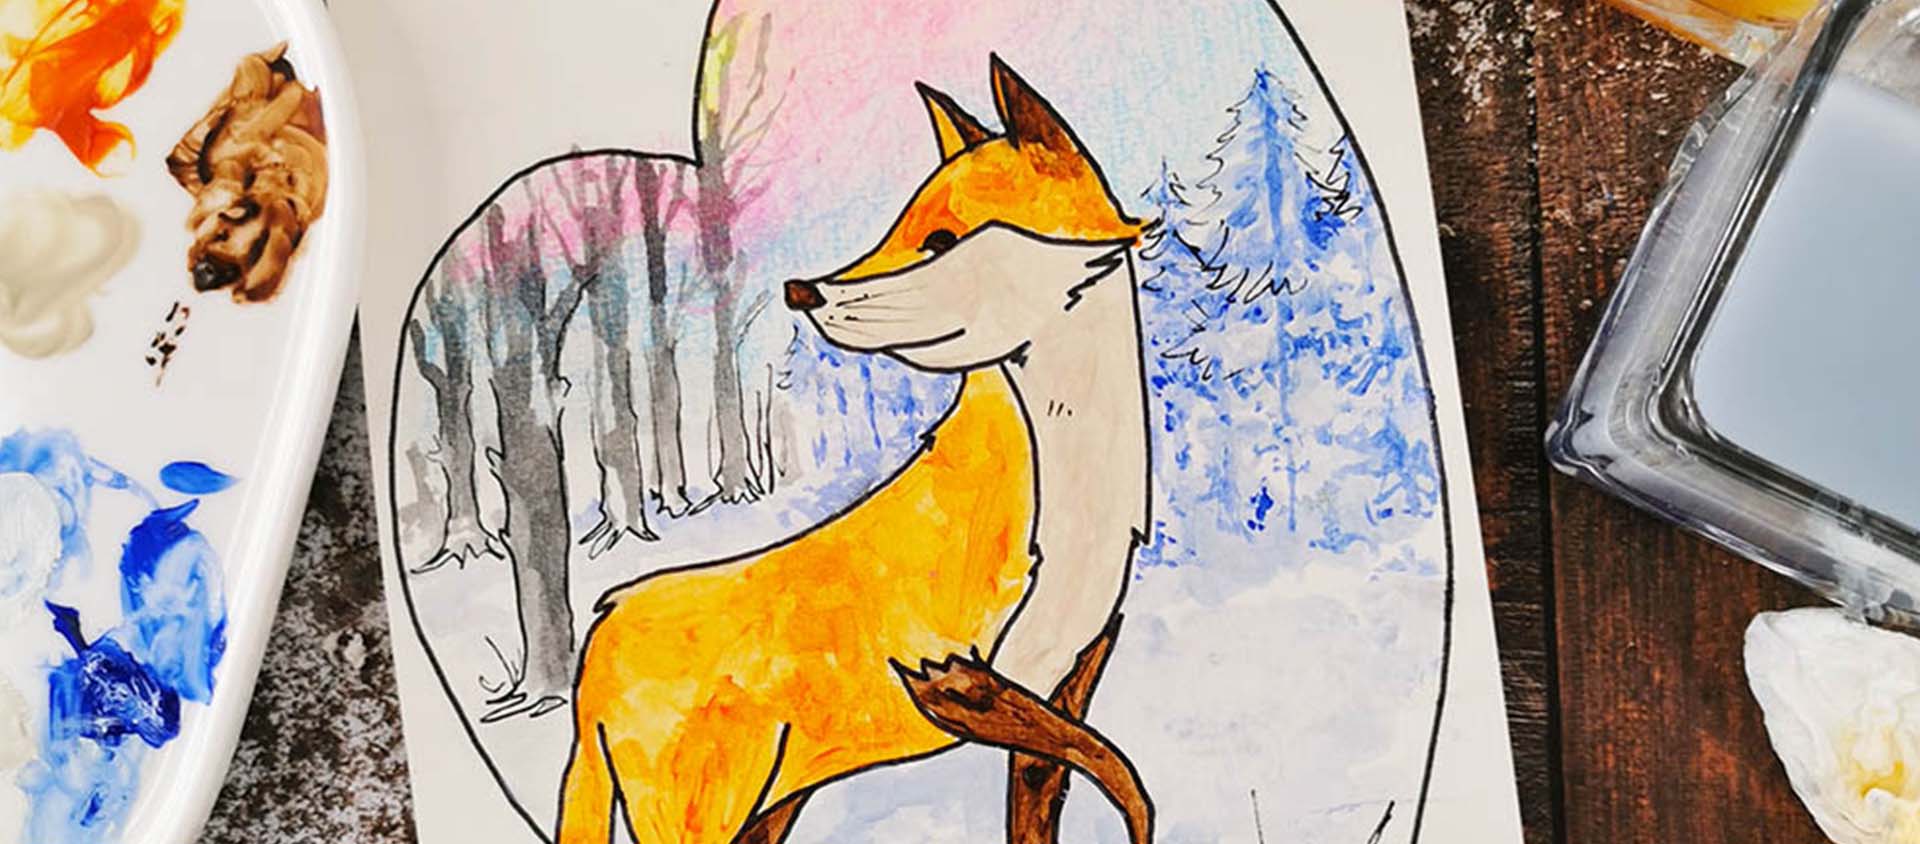 Learn how to paint snow foxes with Simply Watercolour Paint by using this step-by-step guide created by Daler-Rowney artist Amylee Paris, and is easy for beginners to follow and explore using watercolour paint!